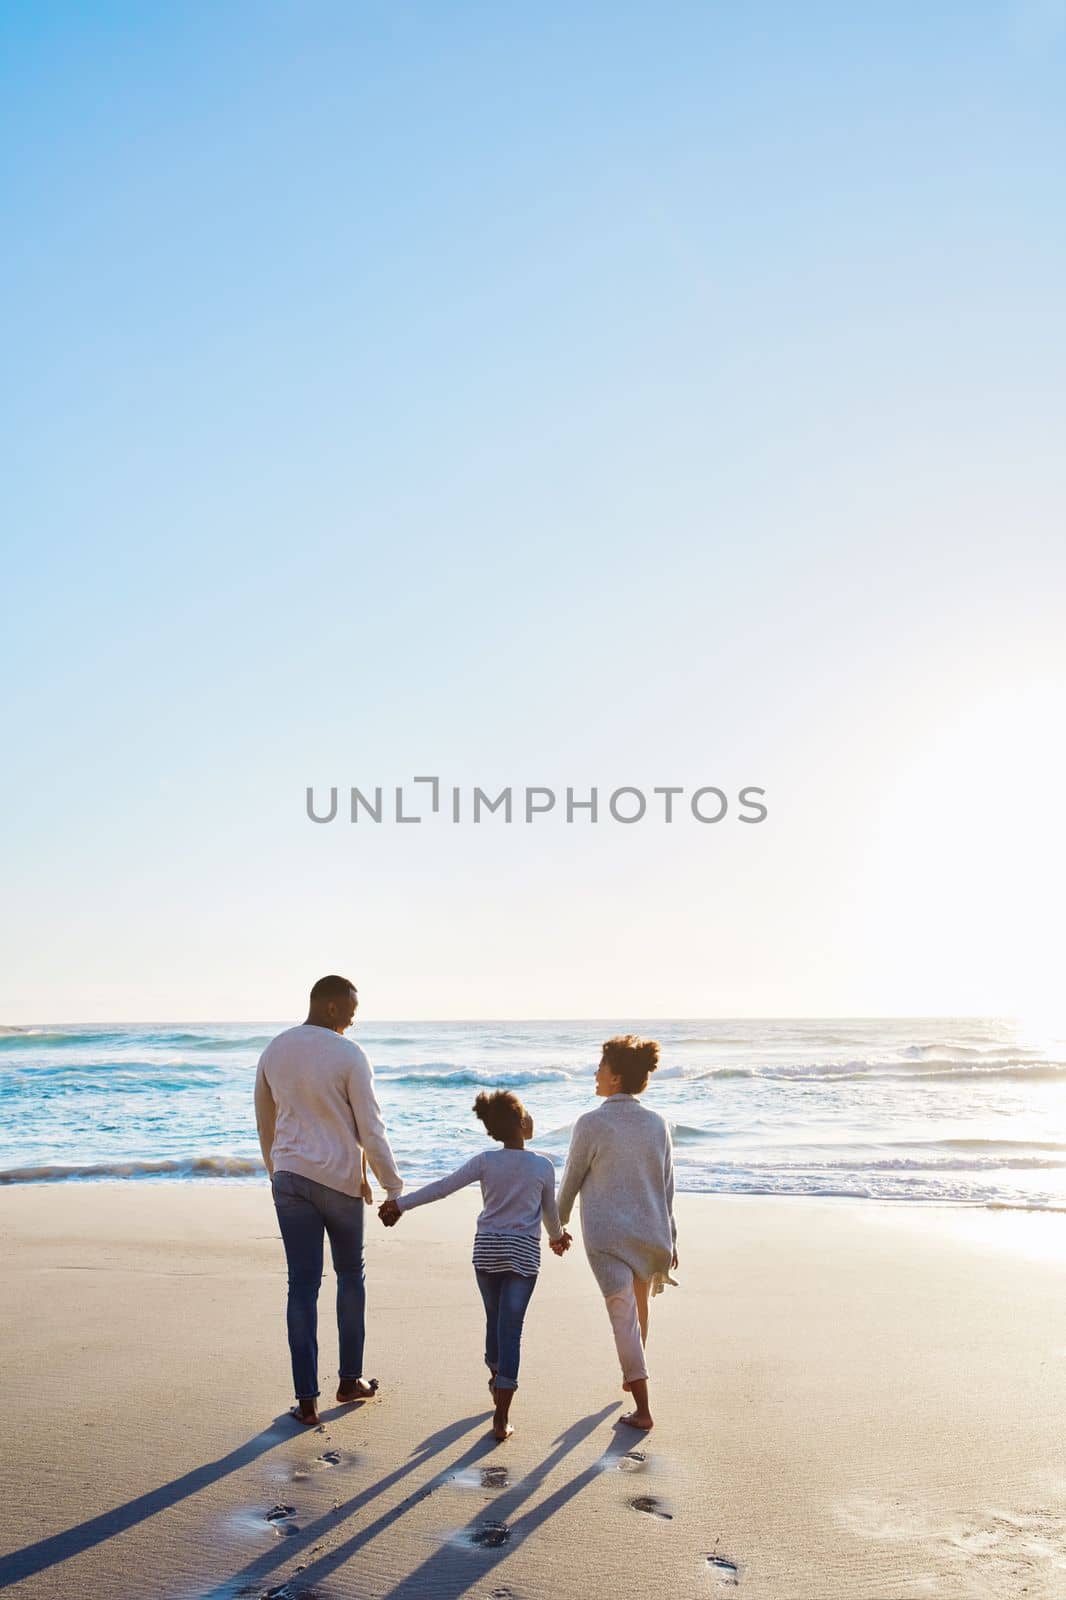 Family, beach and walk during sunset on vacation or holiday relaxing and enjoying peaceful scenery at the ocean. Sea, water and parents with daughter, child or kid with childhood freedom by YuriArcurs